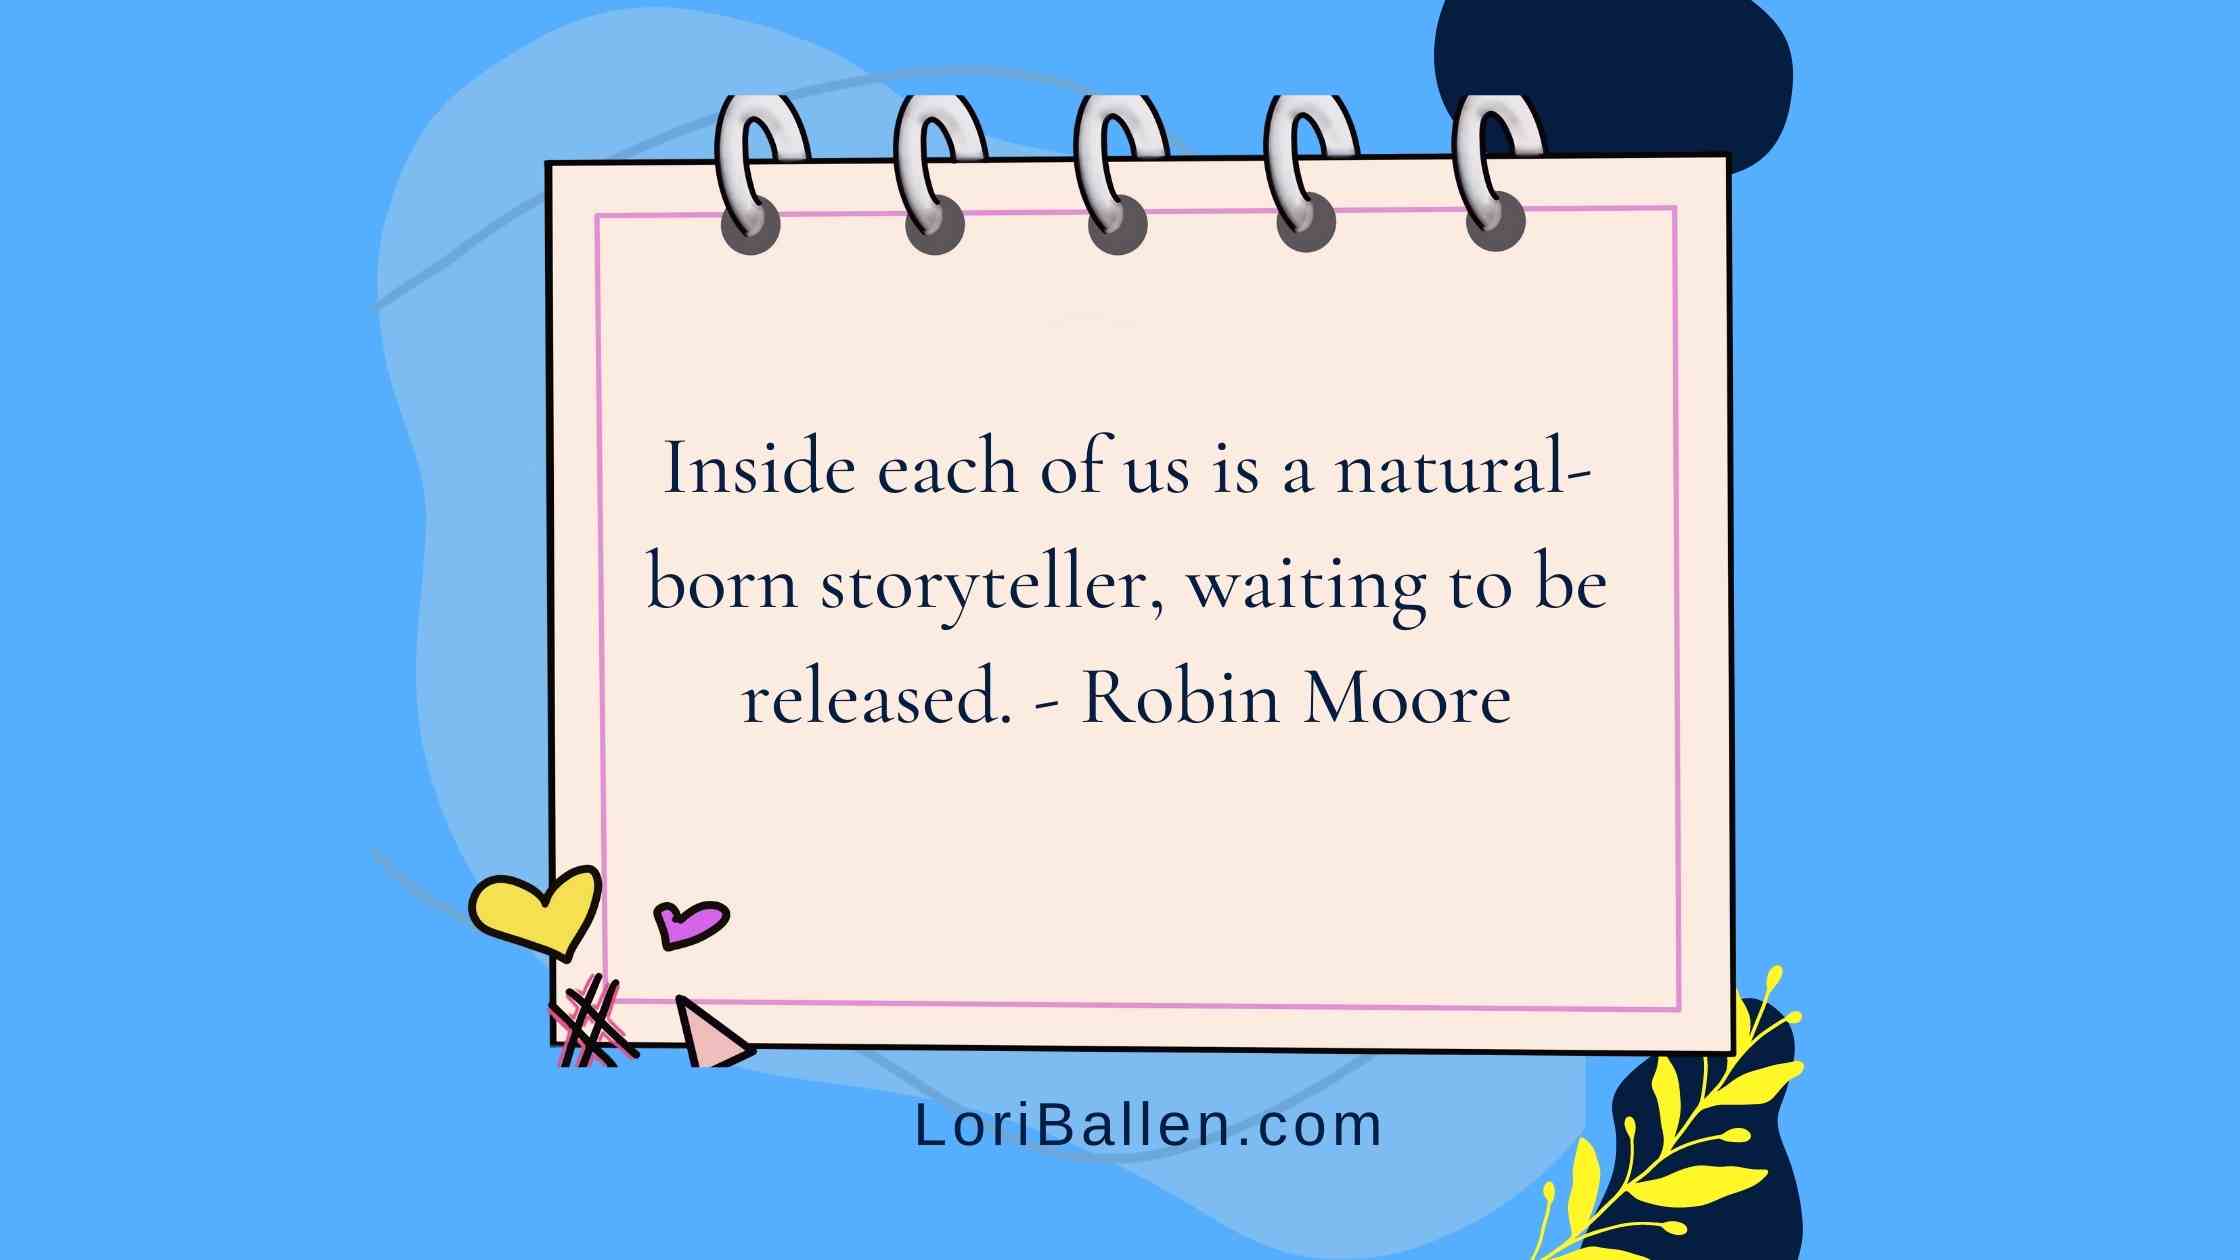 Inside each of us is a natural-born storyteller, waiting to be released.”